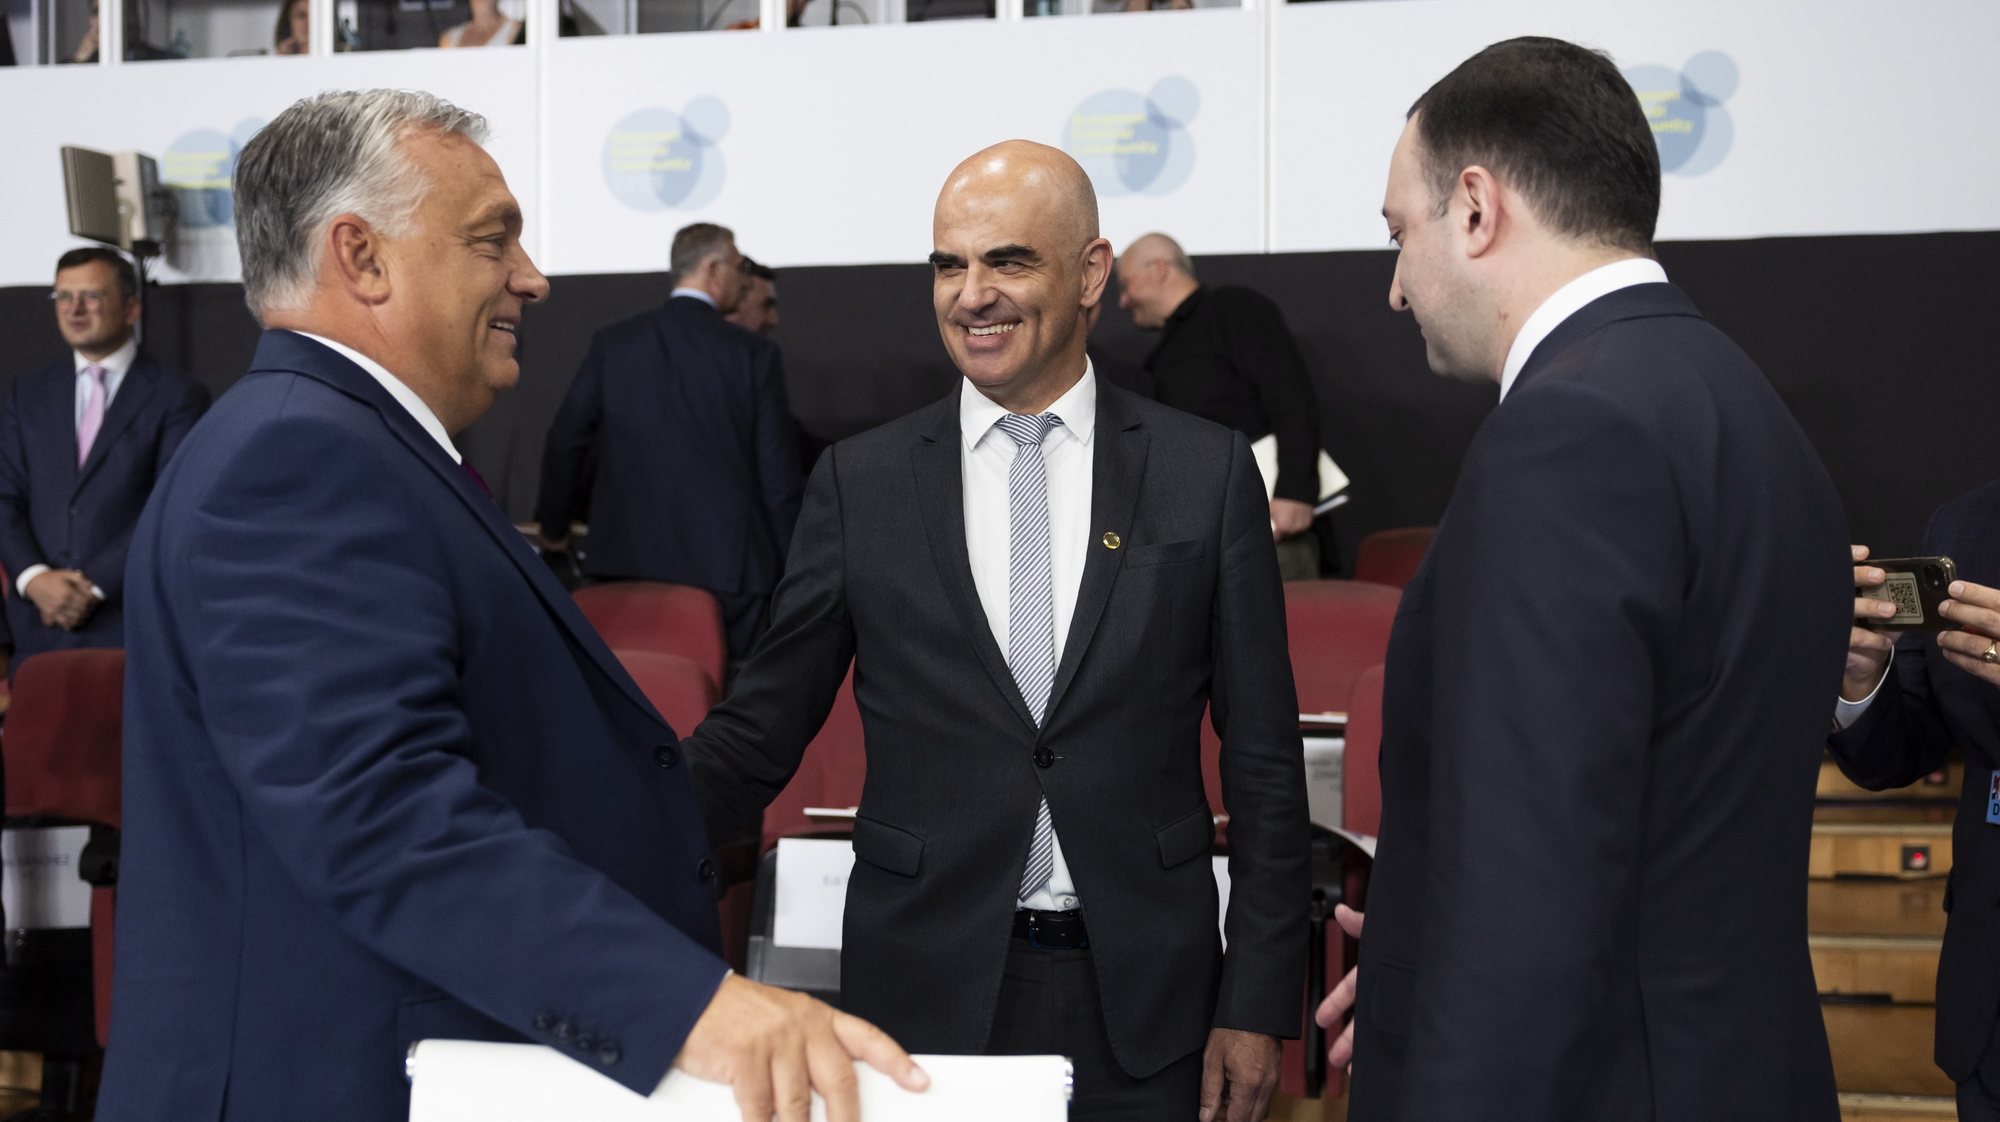 epa10901946 Swiss Federal President Alain Berset (C) talks to Prime Minister of Hungary Viktor Orban (L) and Prime Minister of Georgia Irakli Garibashvili (R) prior to the opening ceremony of the third meeting of the European Political Community (EPC) Summit at the Congress Hall in Granada, Spain, 05 October 2023.  EPA/PETER KLAUNZER